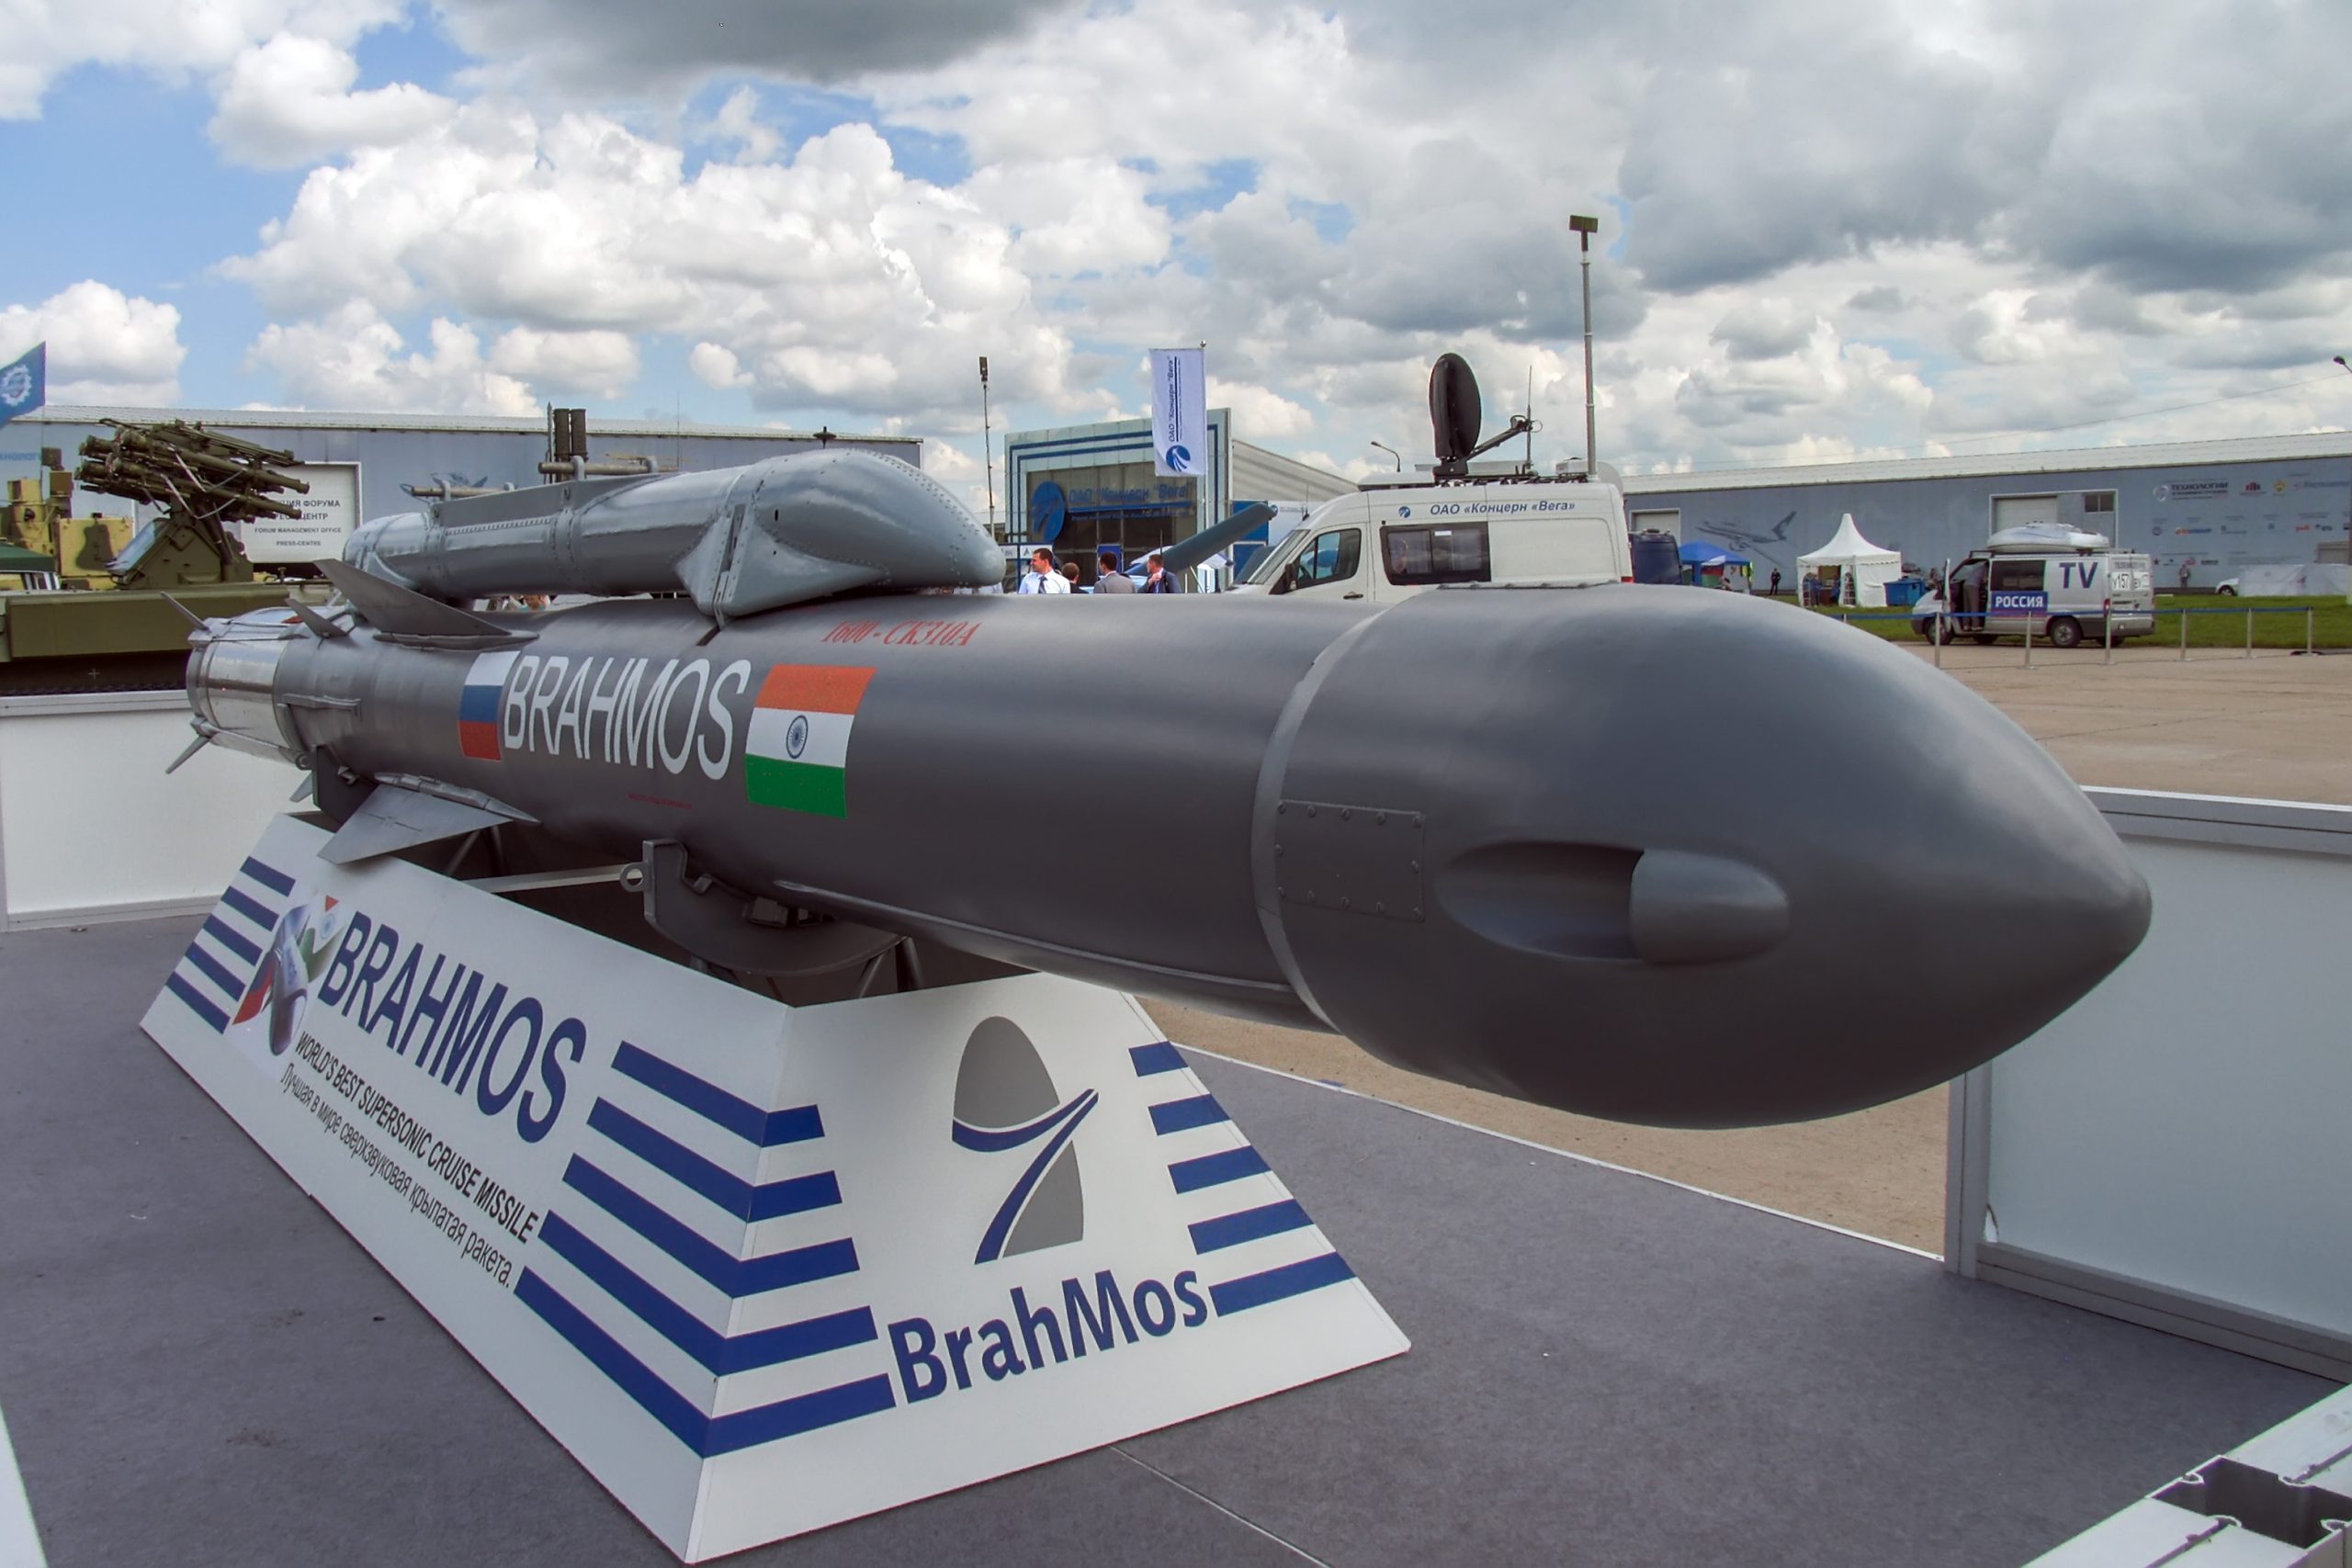 Philippines Army Indicates Possible Induction Date for BrahMos Anti-Ship Cruise Missile